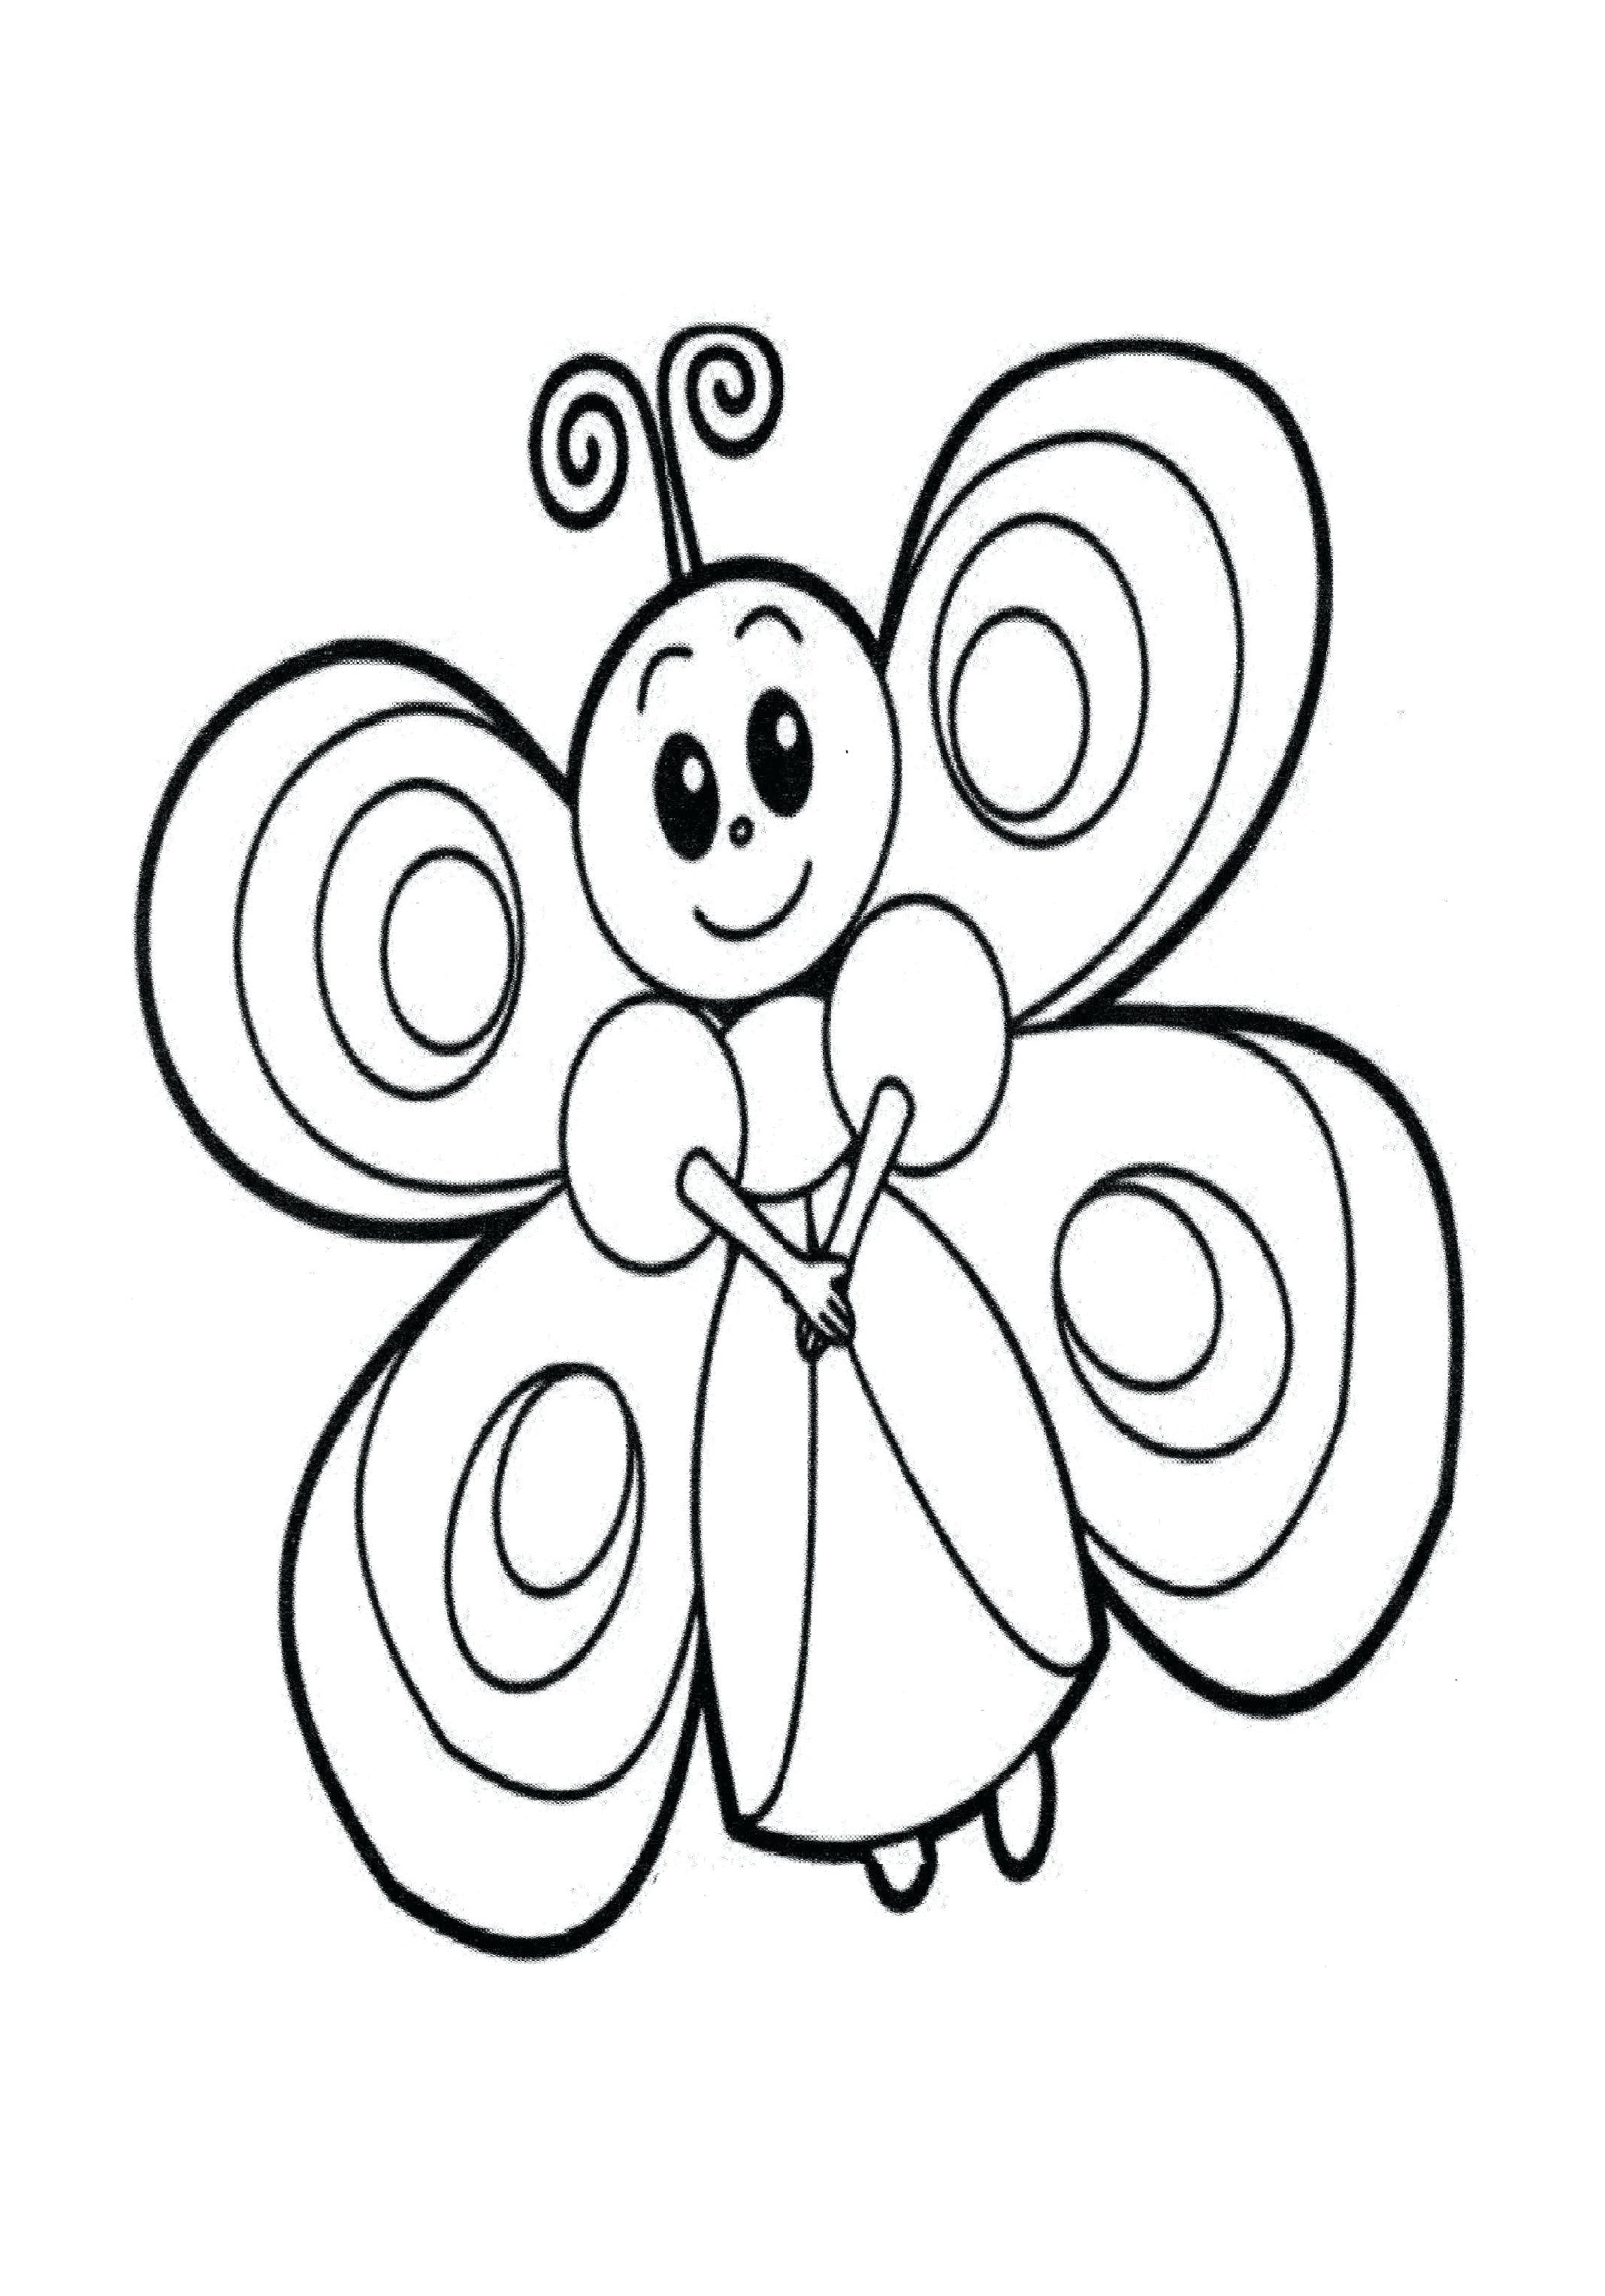 Cartoon Butterflies Coloring Pages Images Of Butterflies Coloring Pages Amicuscolorco